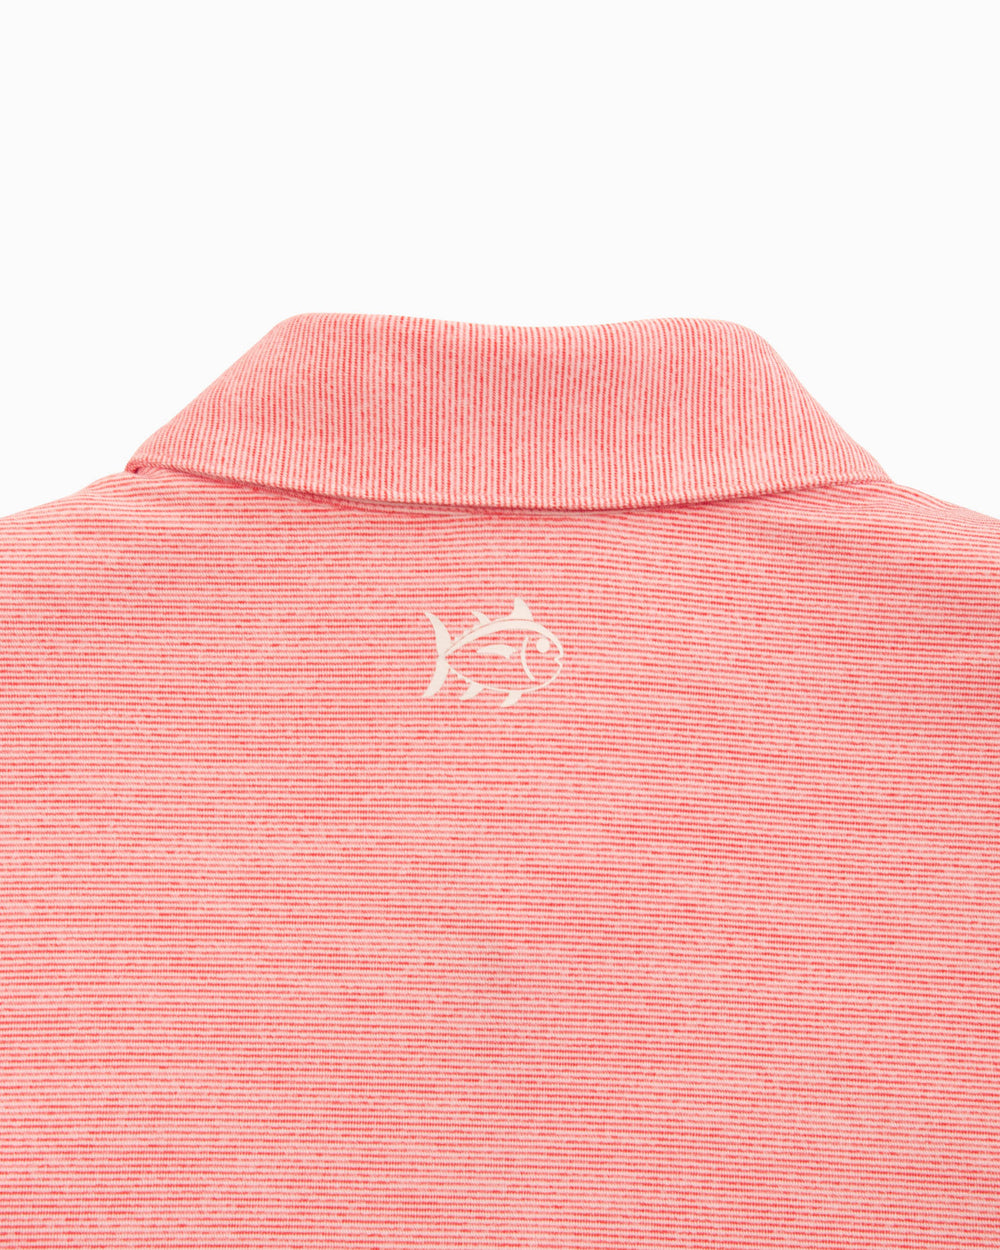 The yoke view of the Texas Tech Driver Spacedye Polo Shirt by Southern Tide - Varsity Red